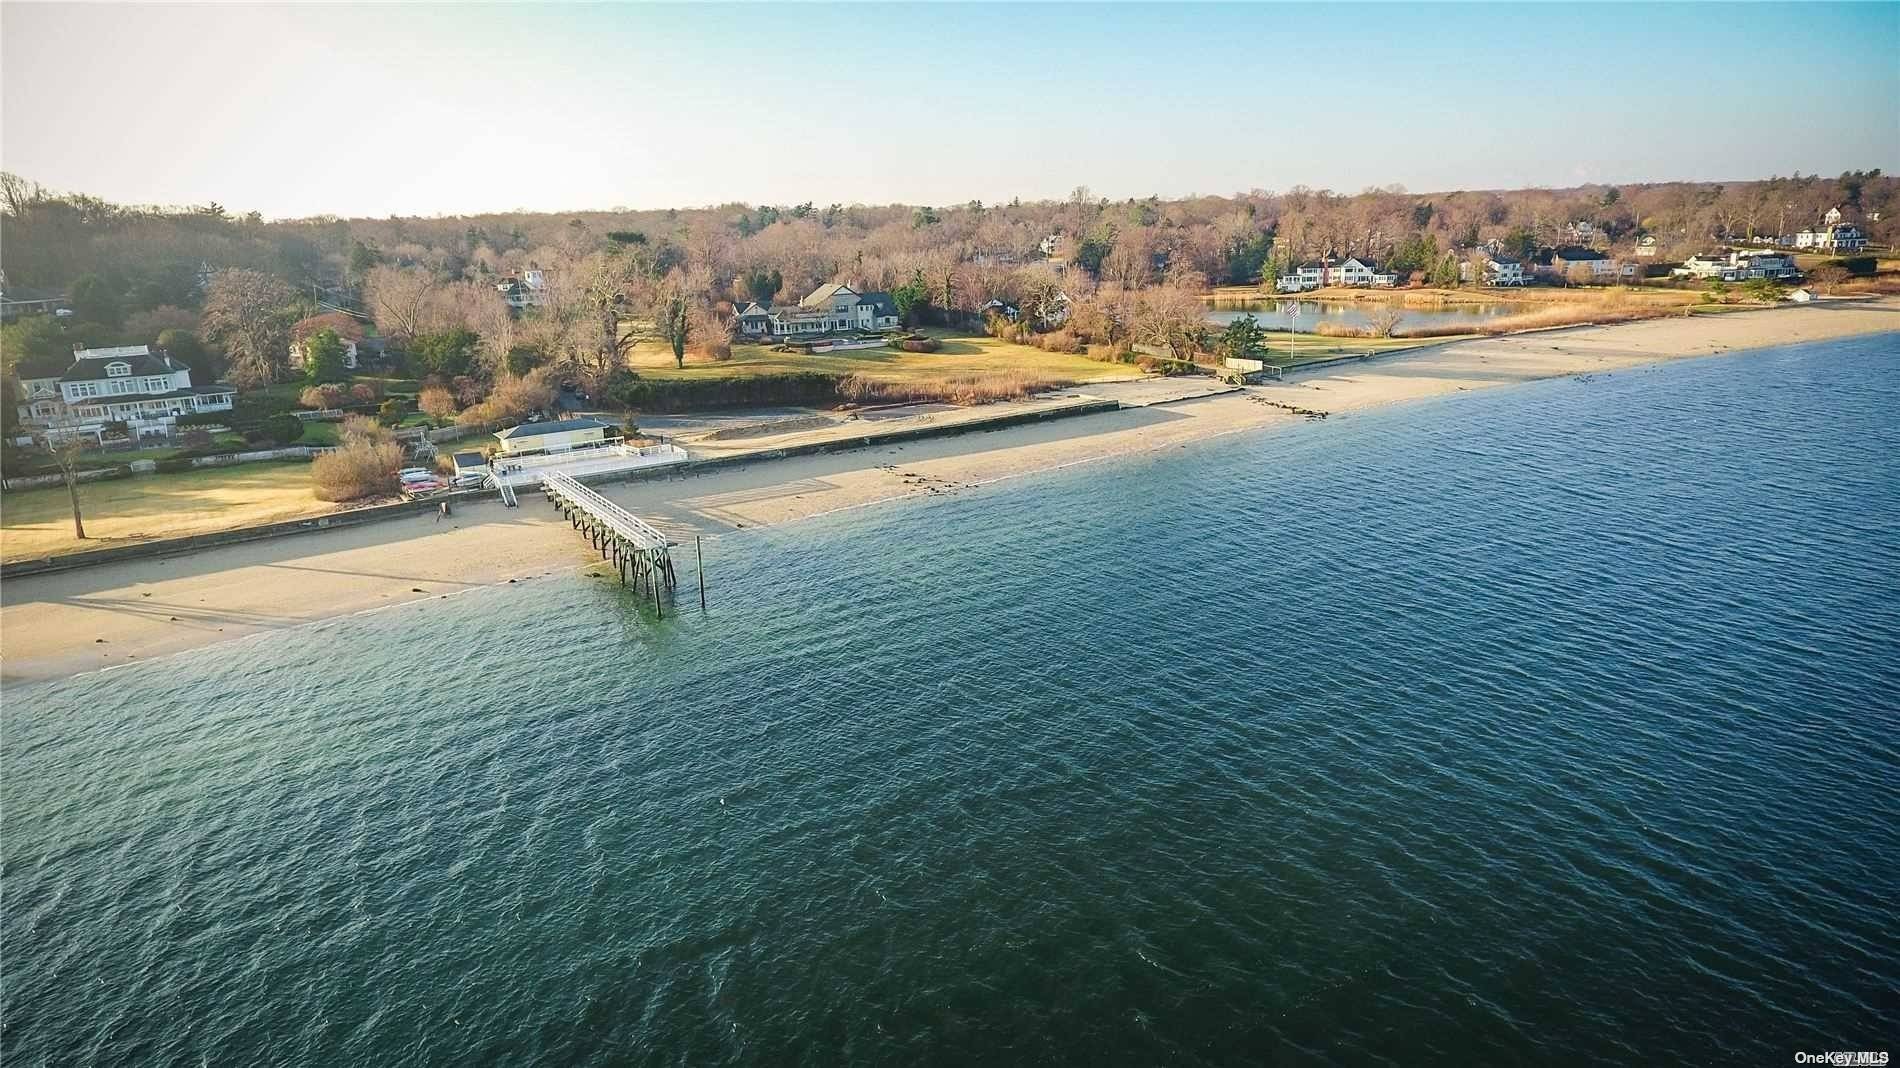 This majestic home situated on nearly 3 acres at one of the areas highest point offering views of Long Island Sound and Connecticut.